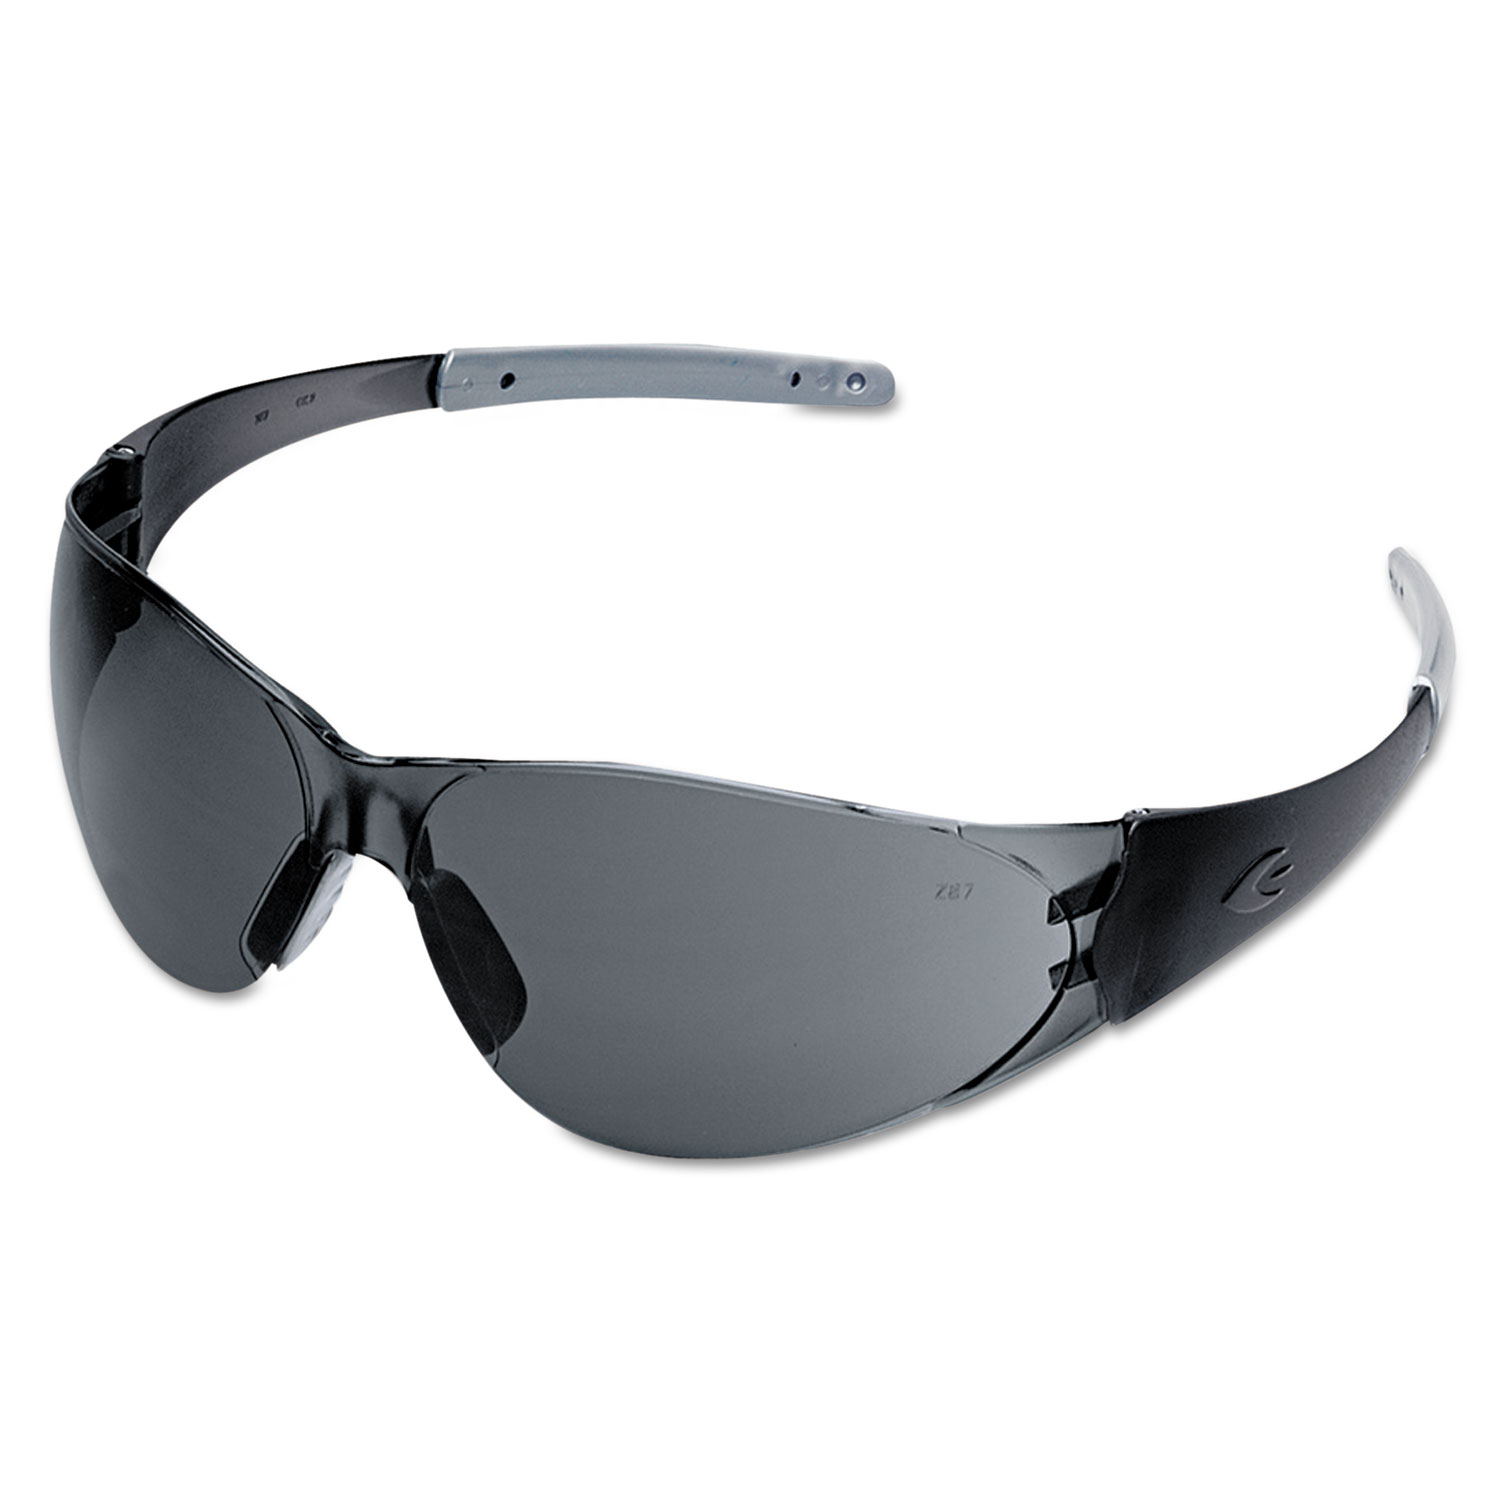 CK2 Series Safety Glasses, Gray